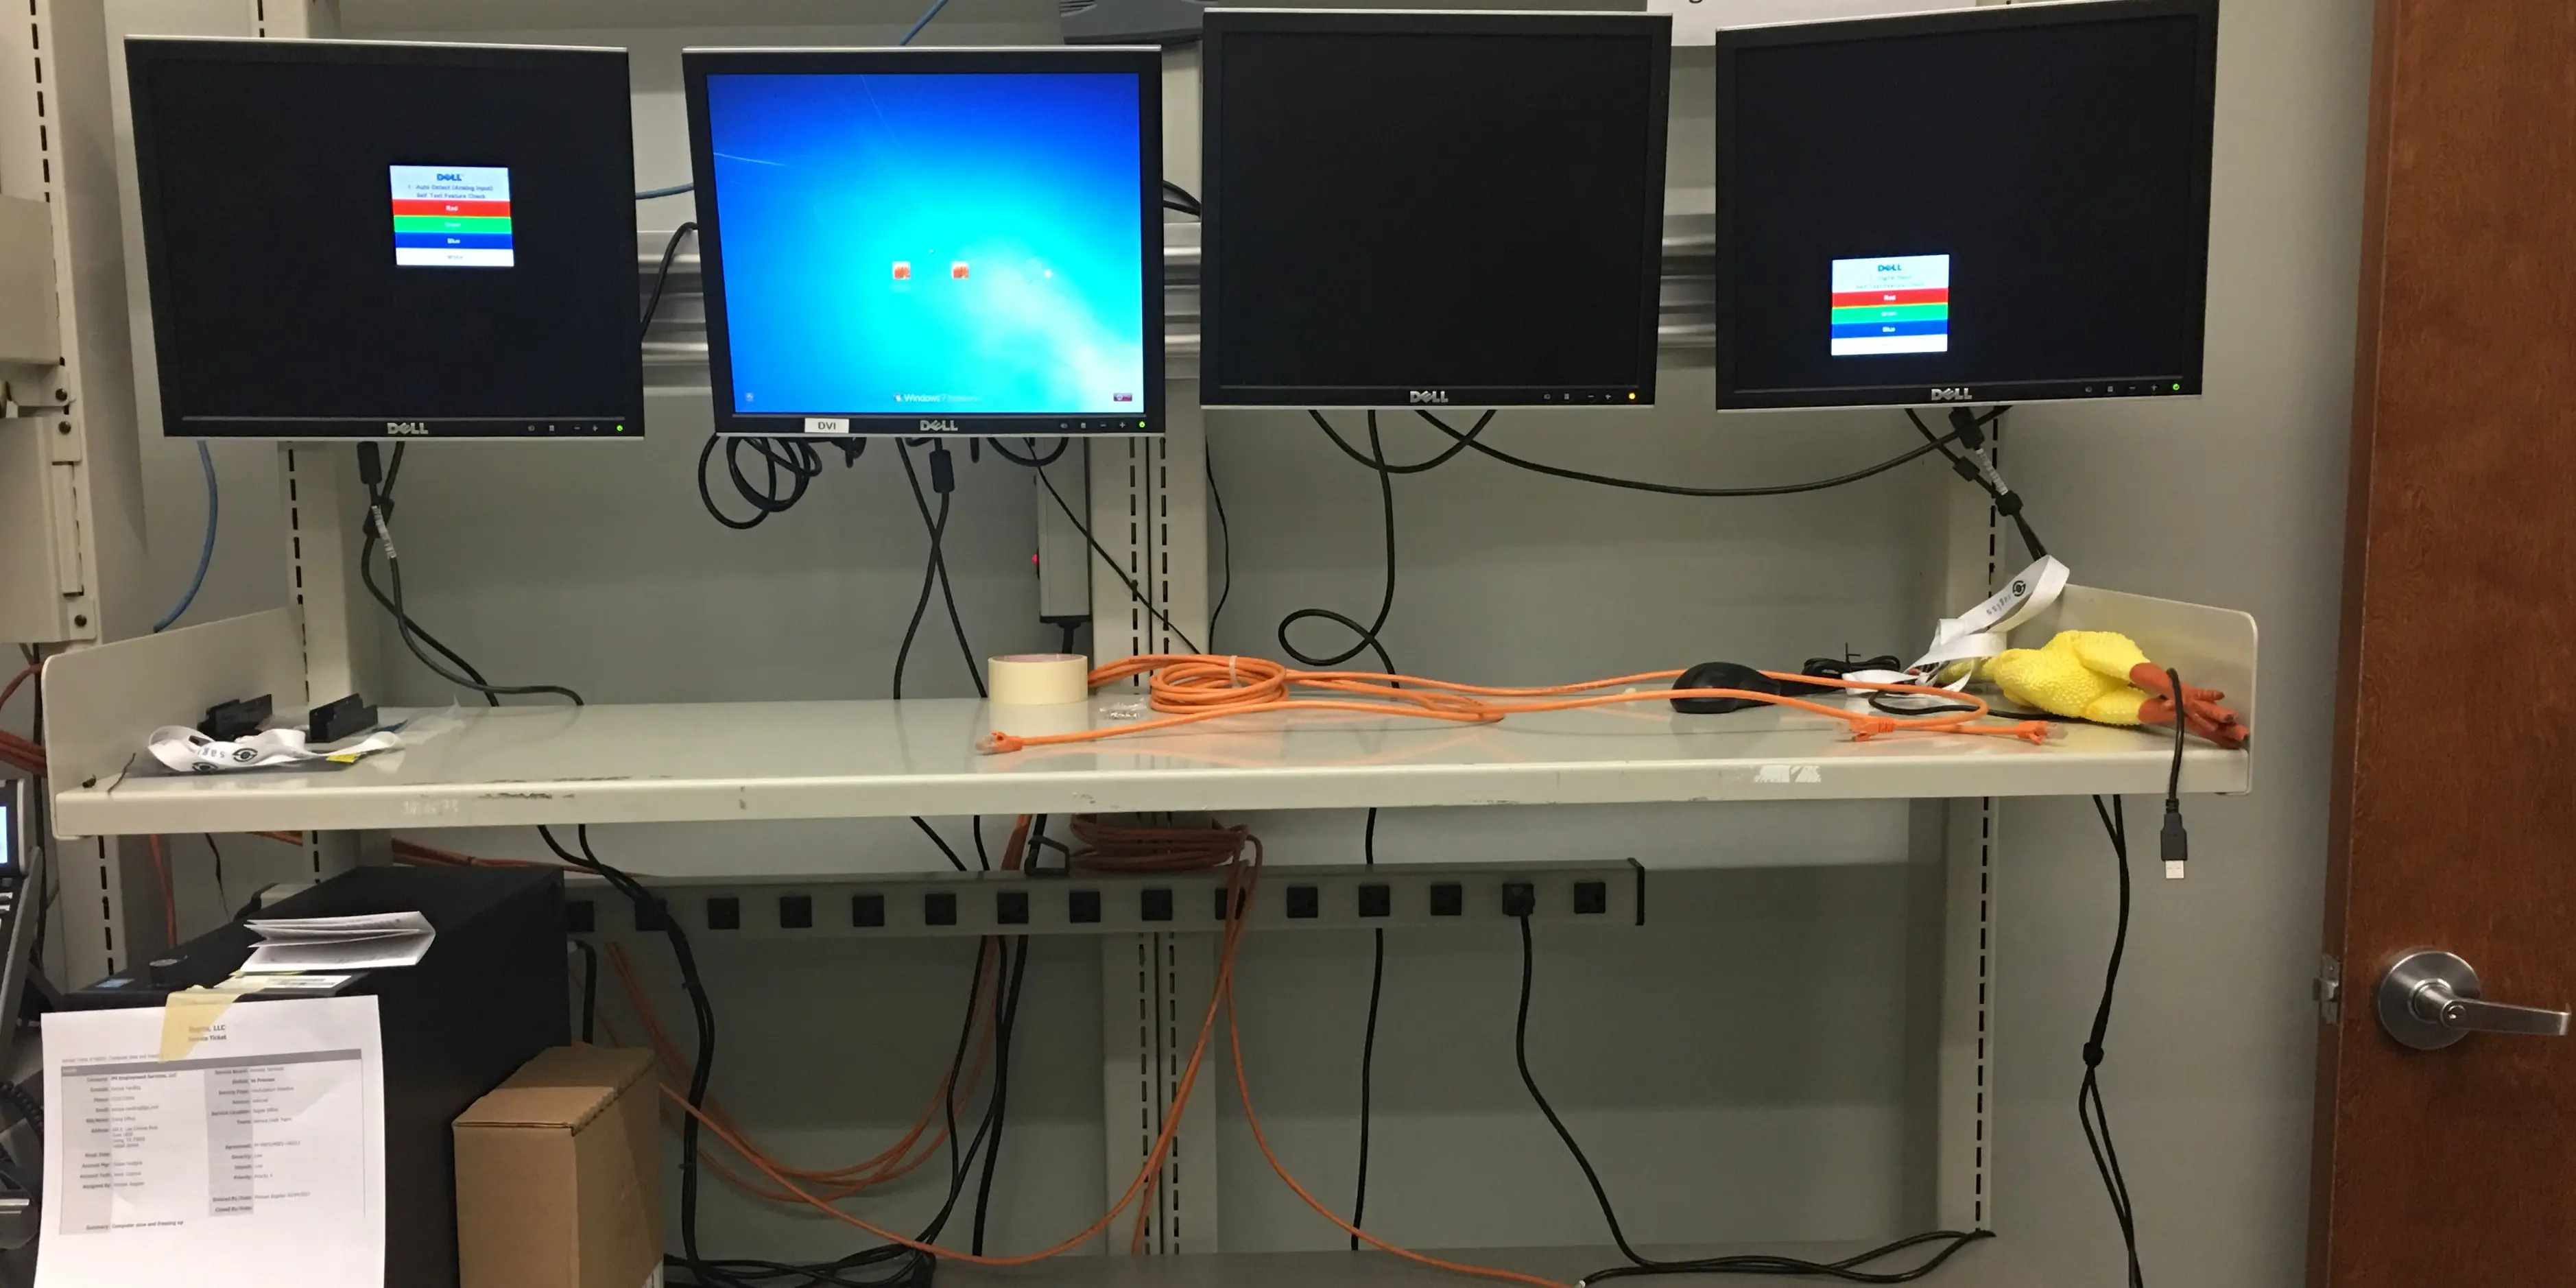 A series of monitors in a computer lab